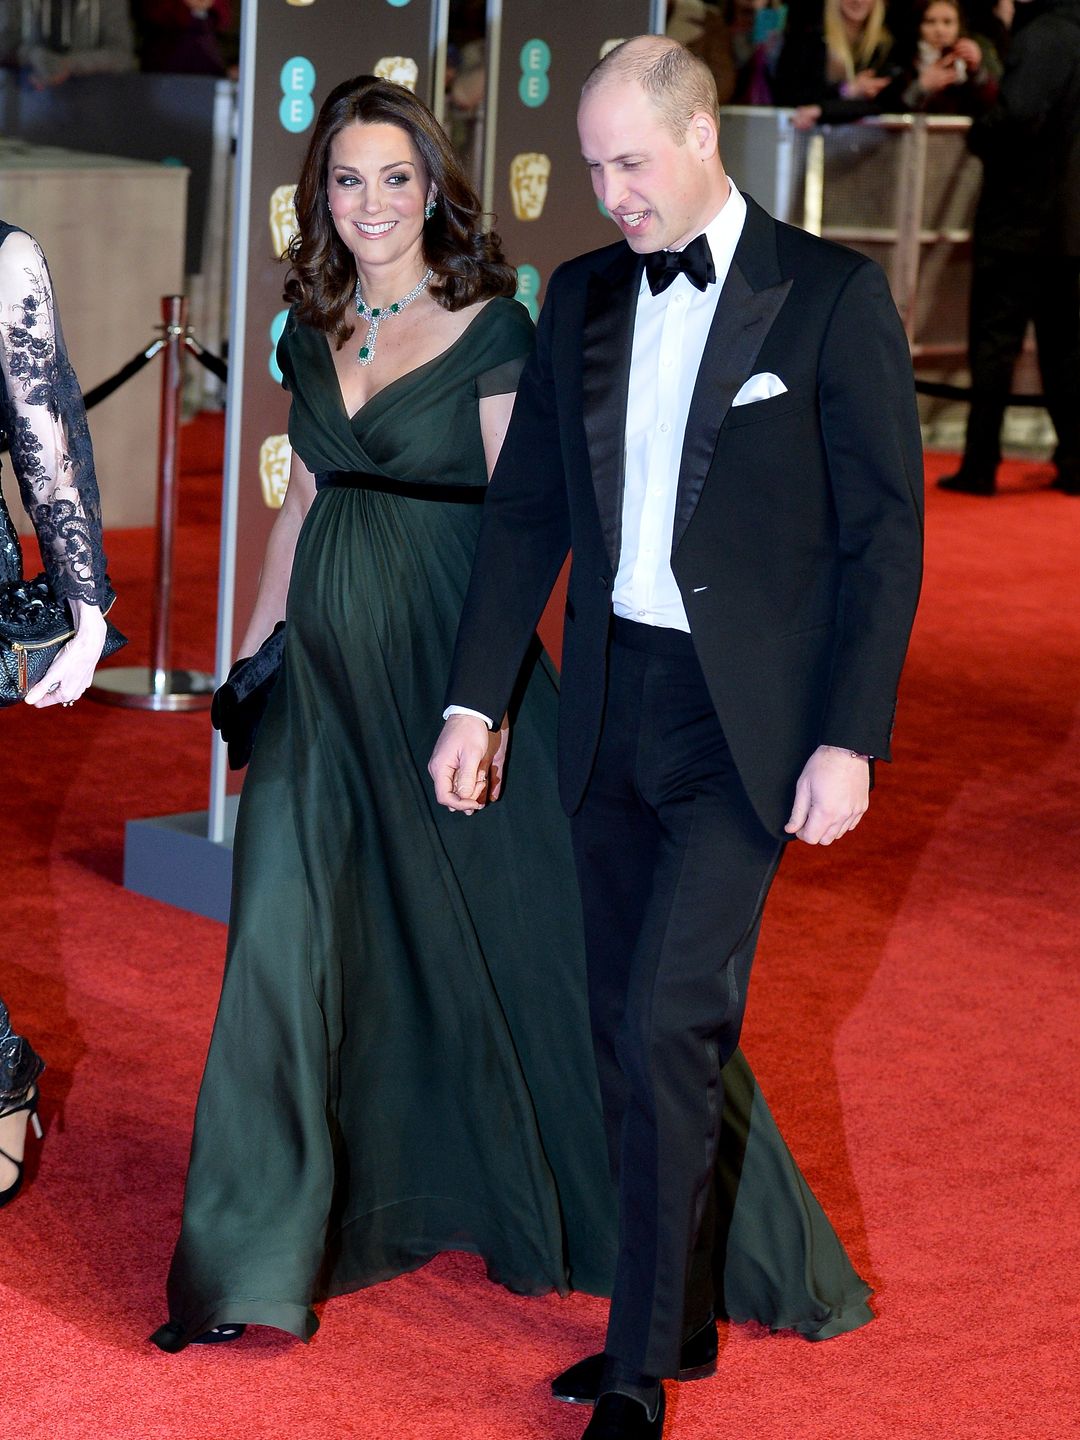 Prince William and Kate attend the EE British Academy Film Awards held at Royal Albert Hall on February 18, 2018